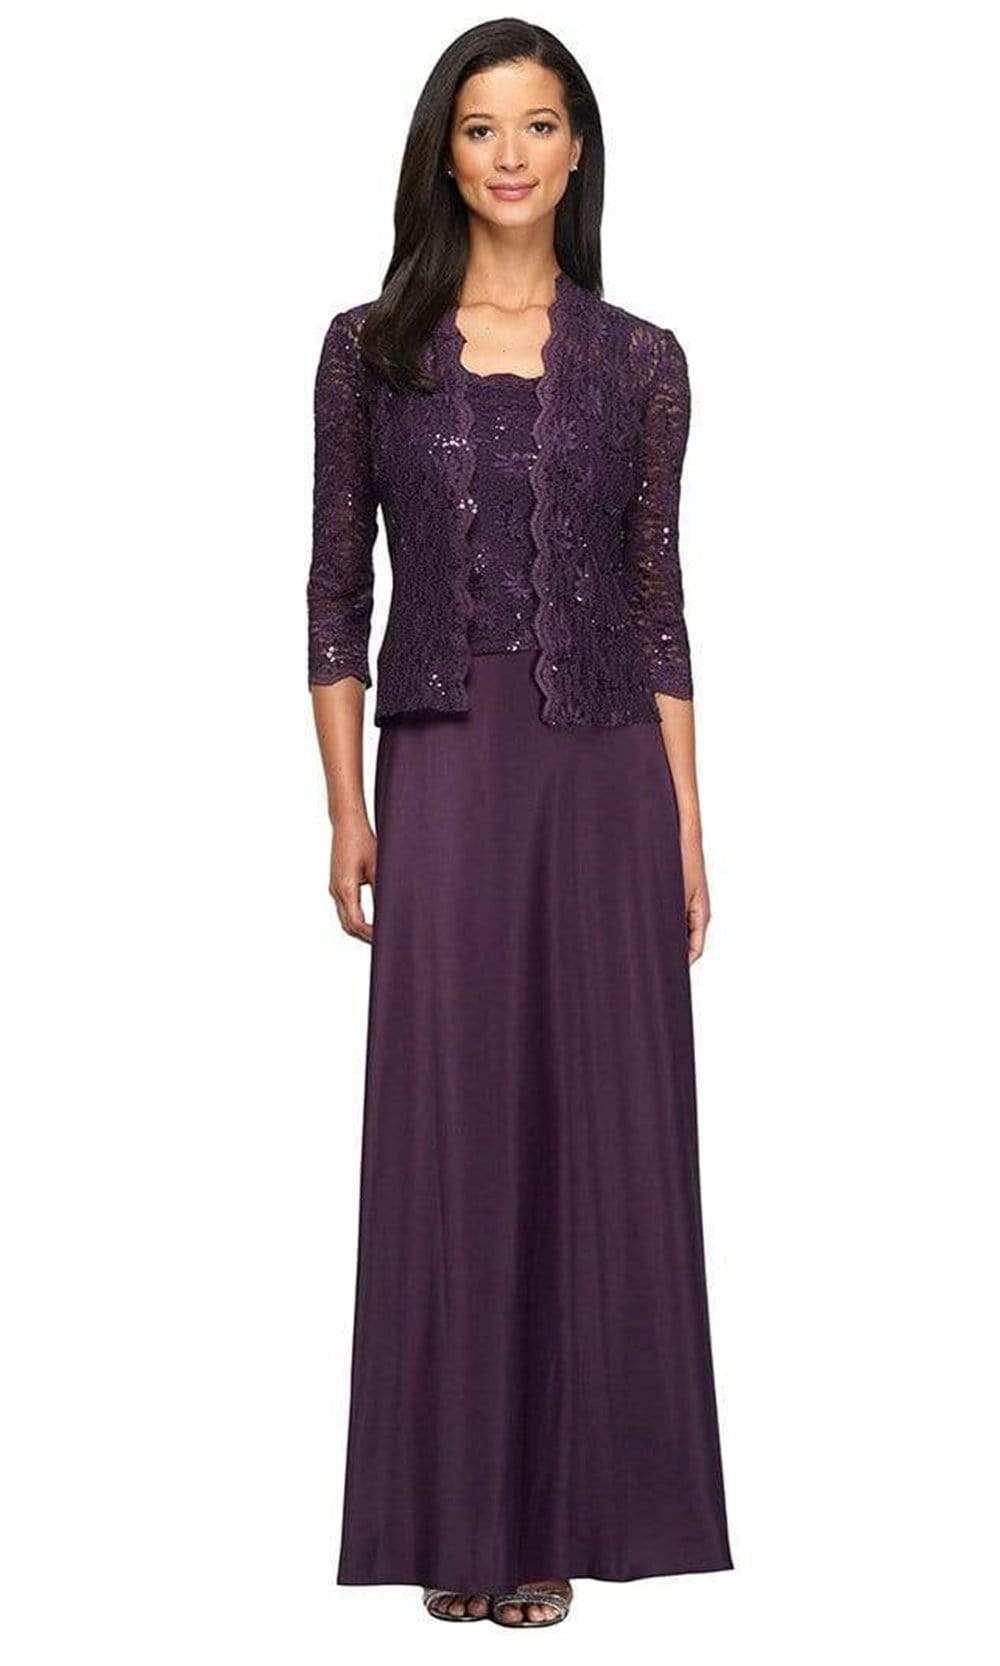 Image of Alex Evenings - 4121198 Sequin Lace and Chiffon Dress with Lace Jacket